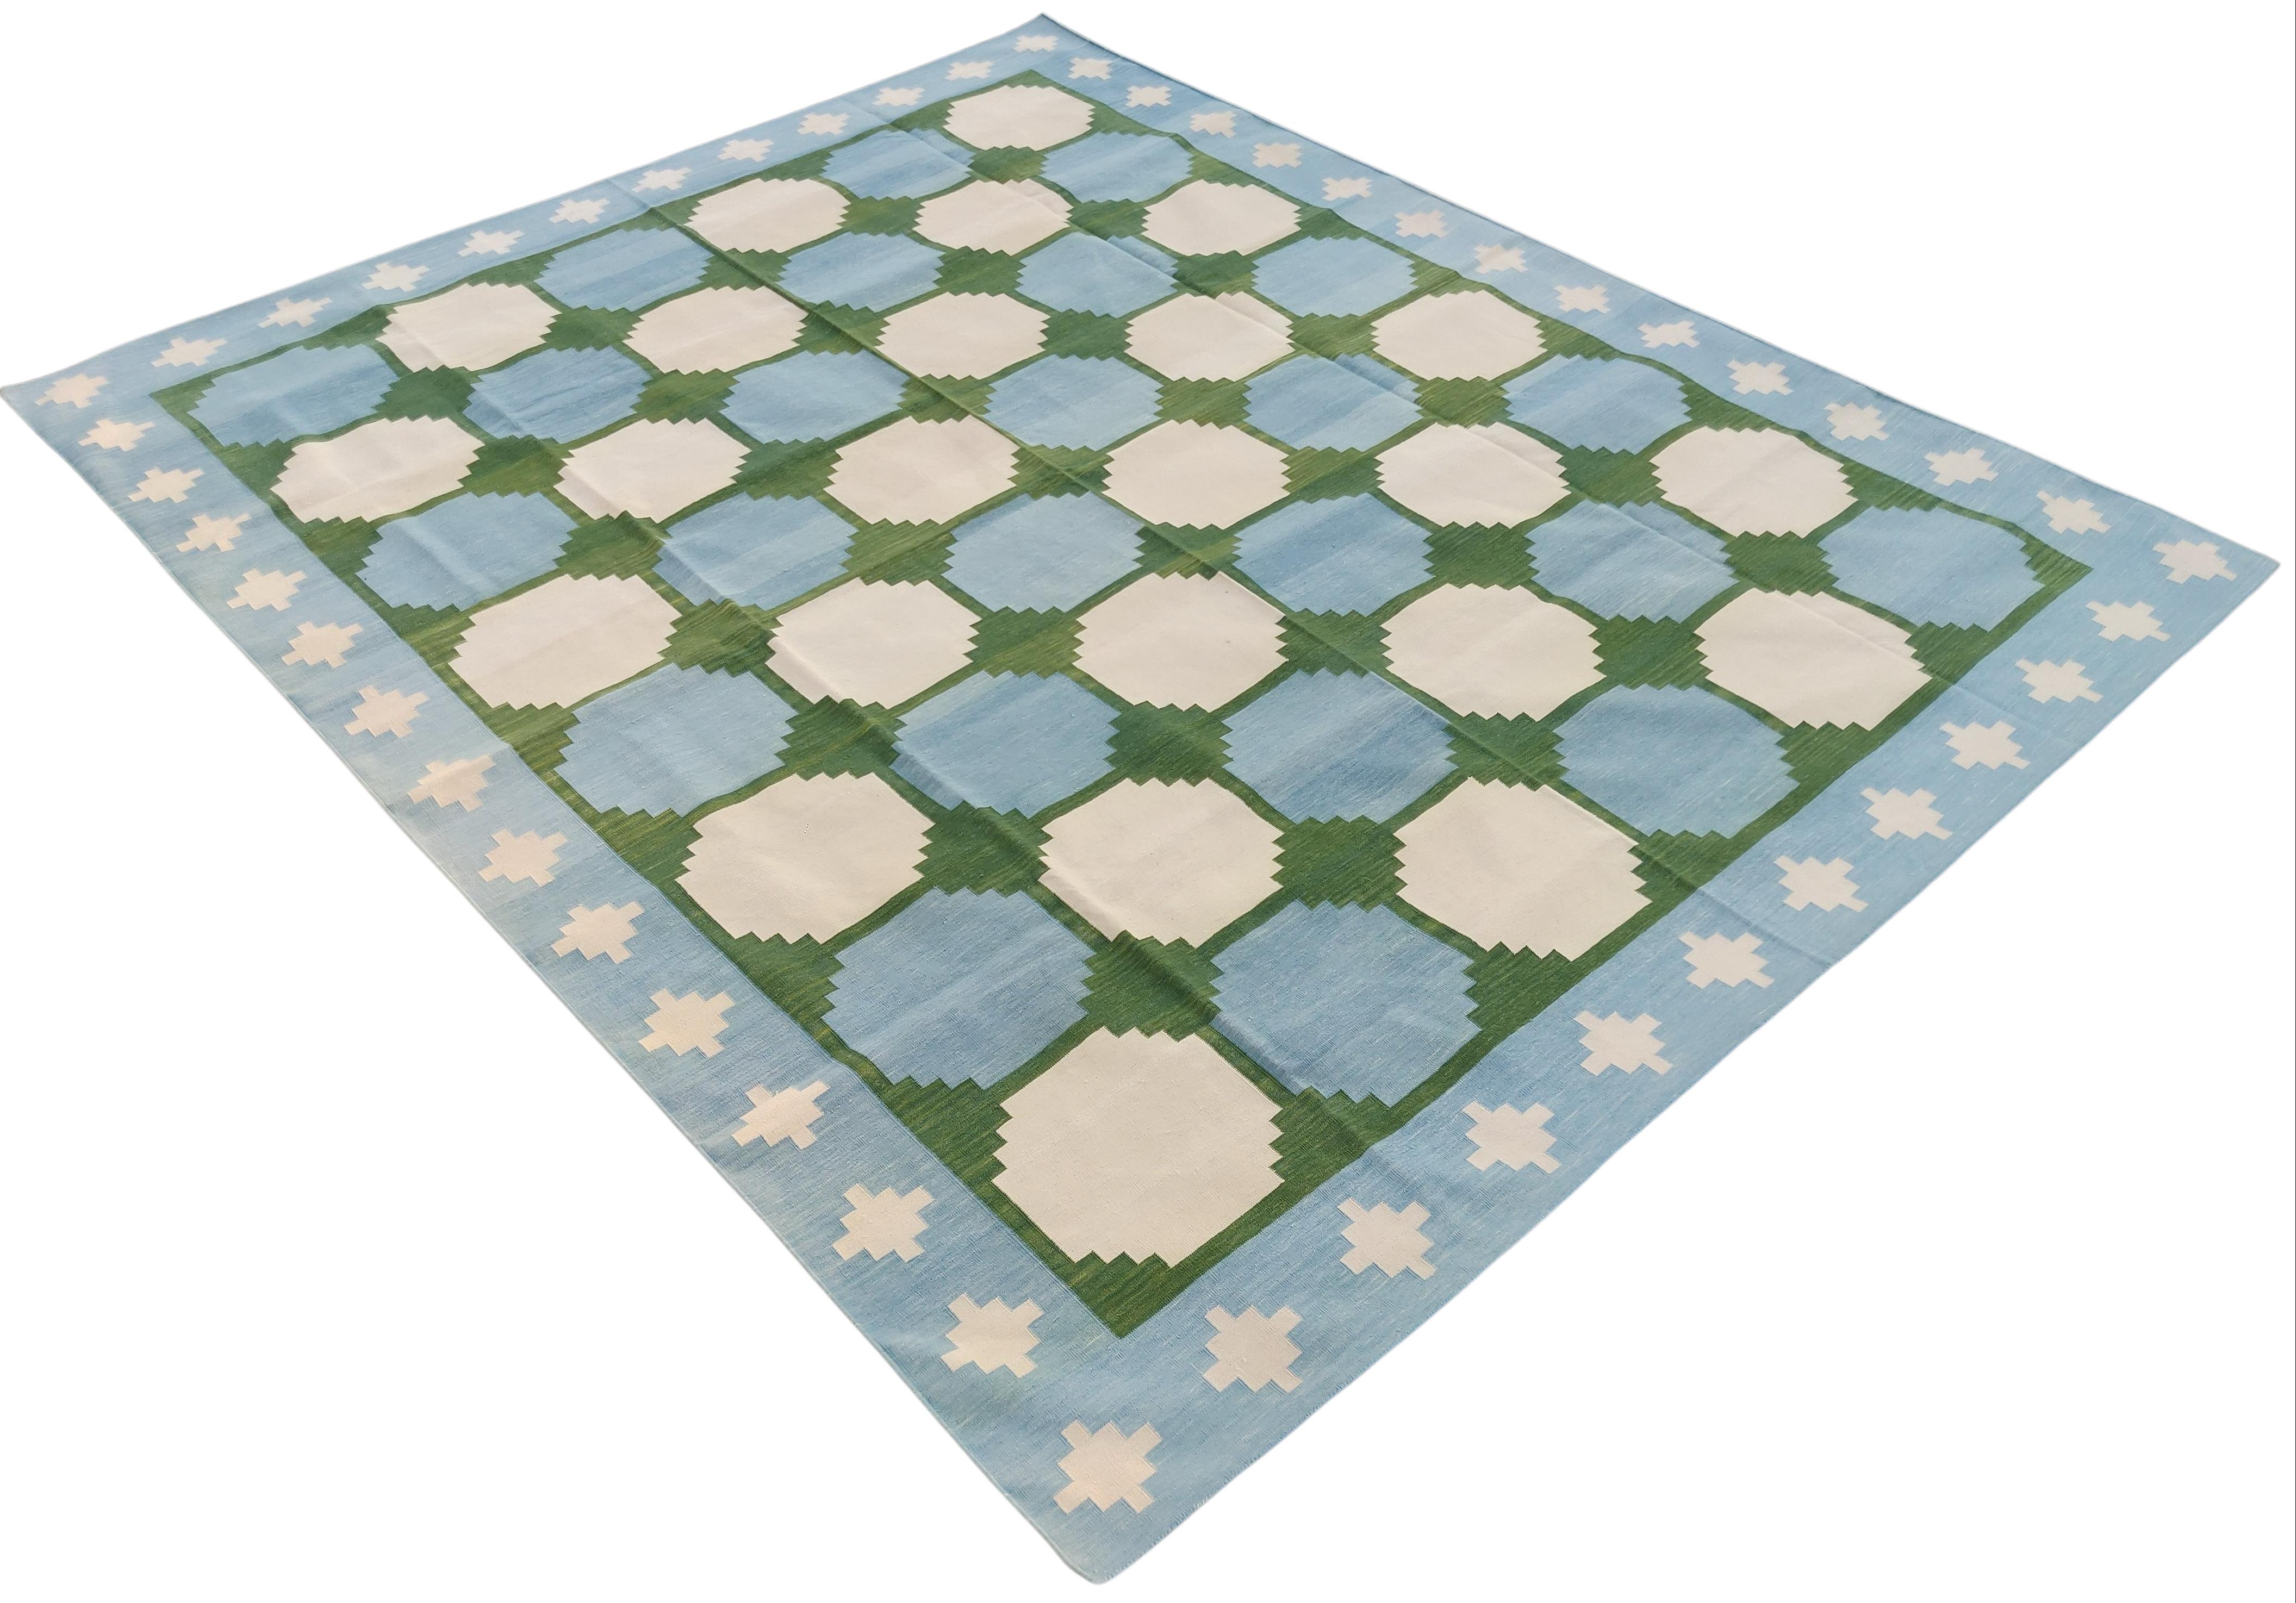 Cotton Natural Vegetable Dyed Forest Green , Sky Blue And Cream Tile Patterned Swedish Rug-12'x15'
These special flat-weave dhurries are hand-woven with 15 ply 100% cotton yarn. Due to the special manufacturing techniques used to create our rugs,